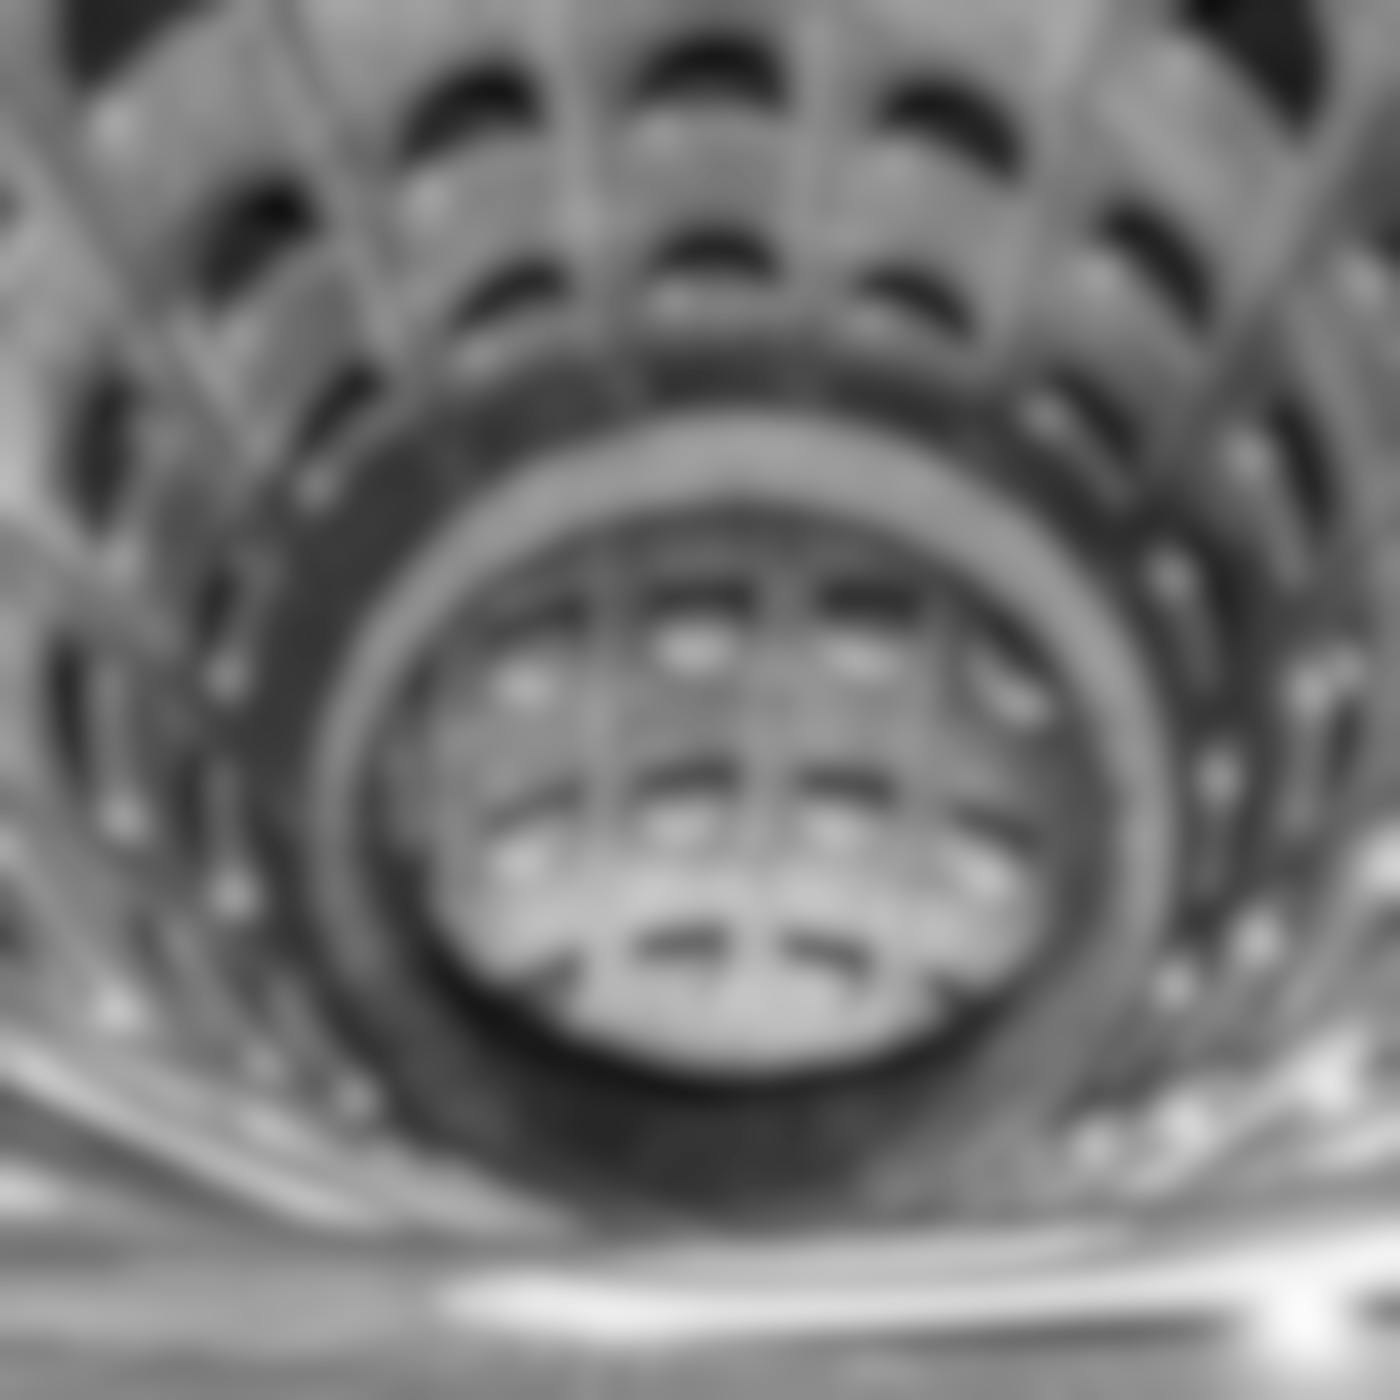 interior spiral building in black and white